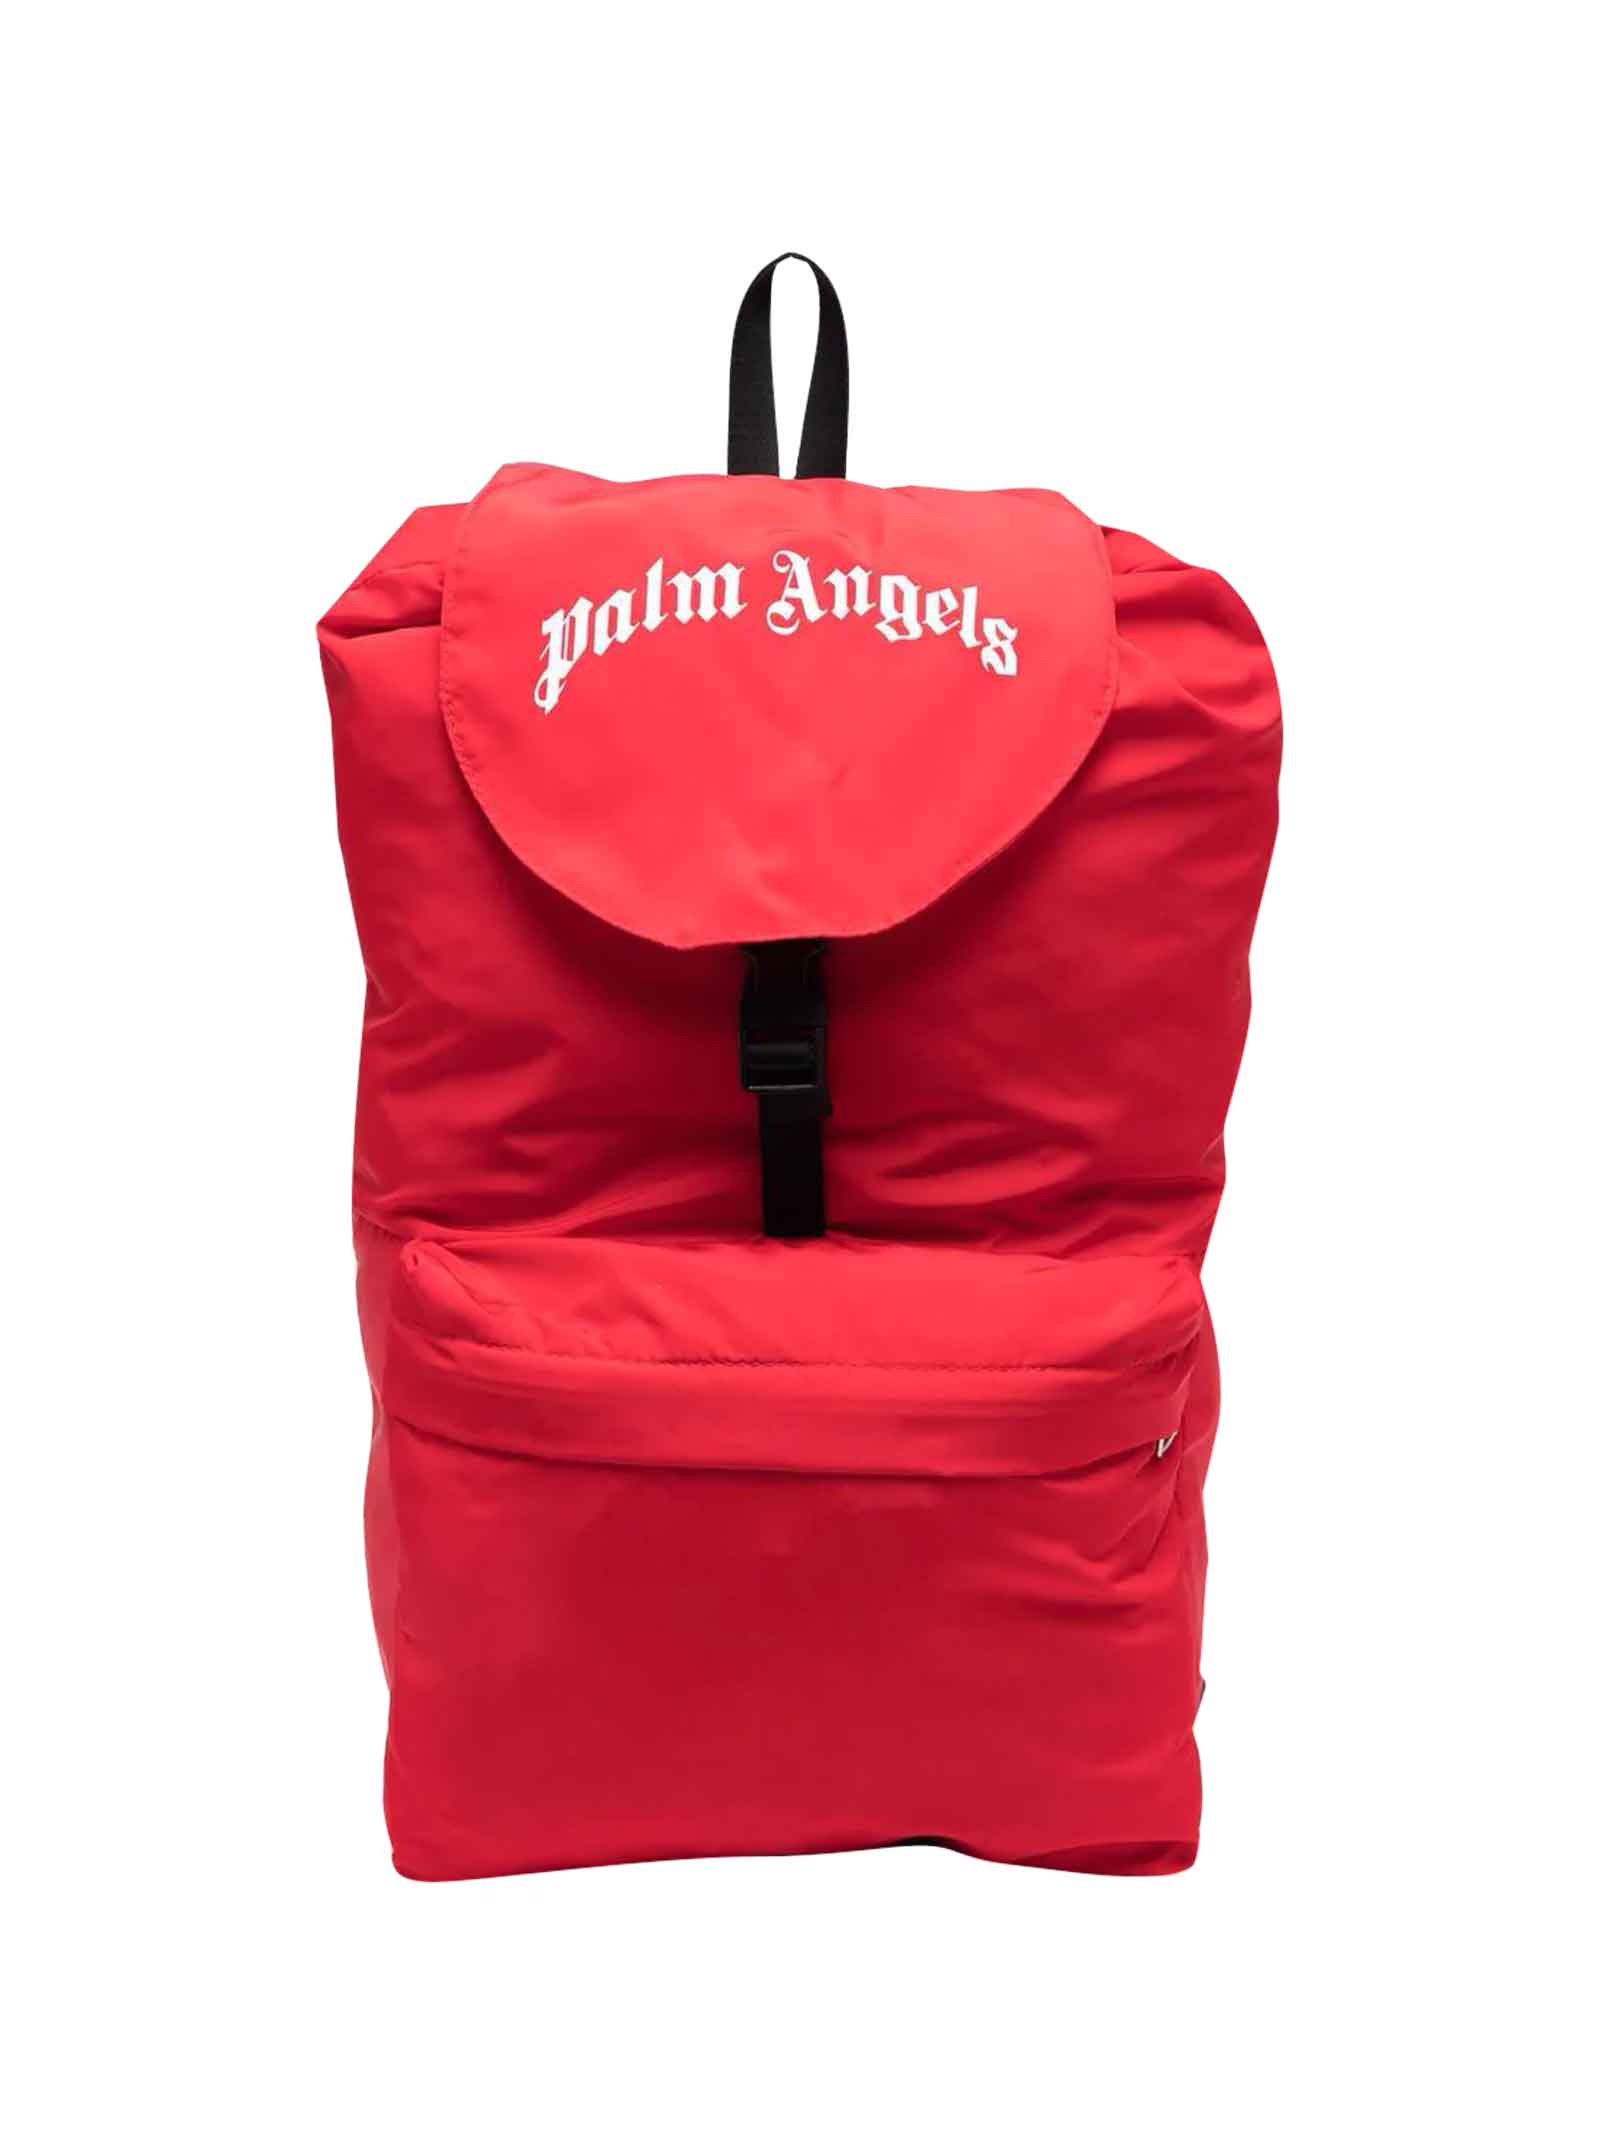 Palm Angels Red Backpack Boy